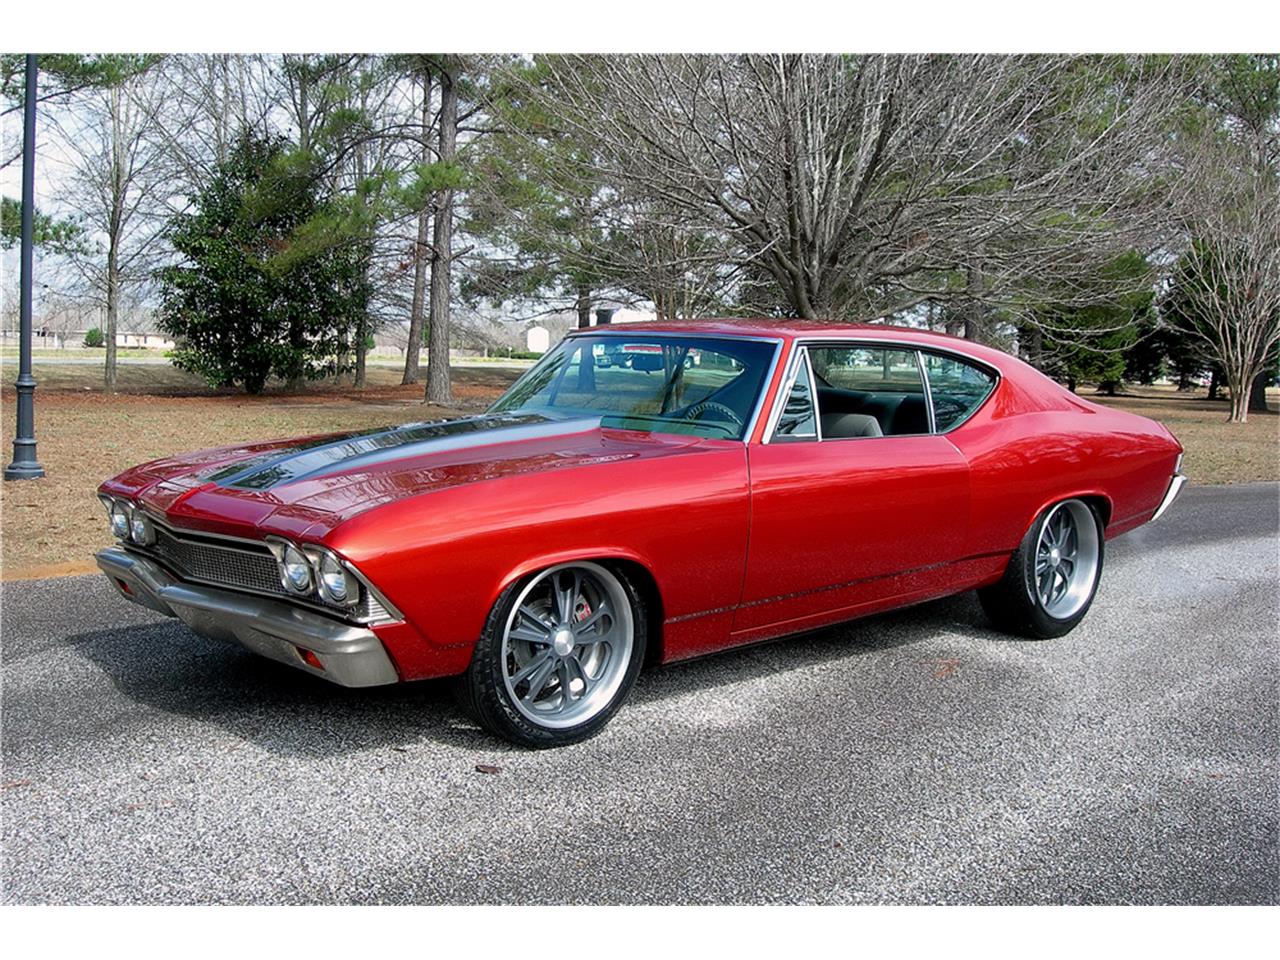 ORANGE 1968 Chevrolet Chevelle SS for sale located in West Palm Beach, Flor...